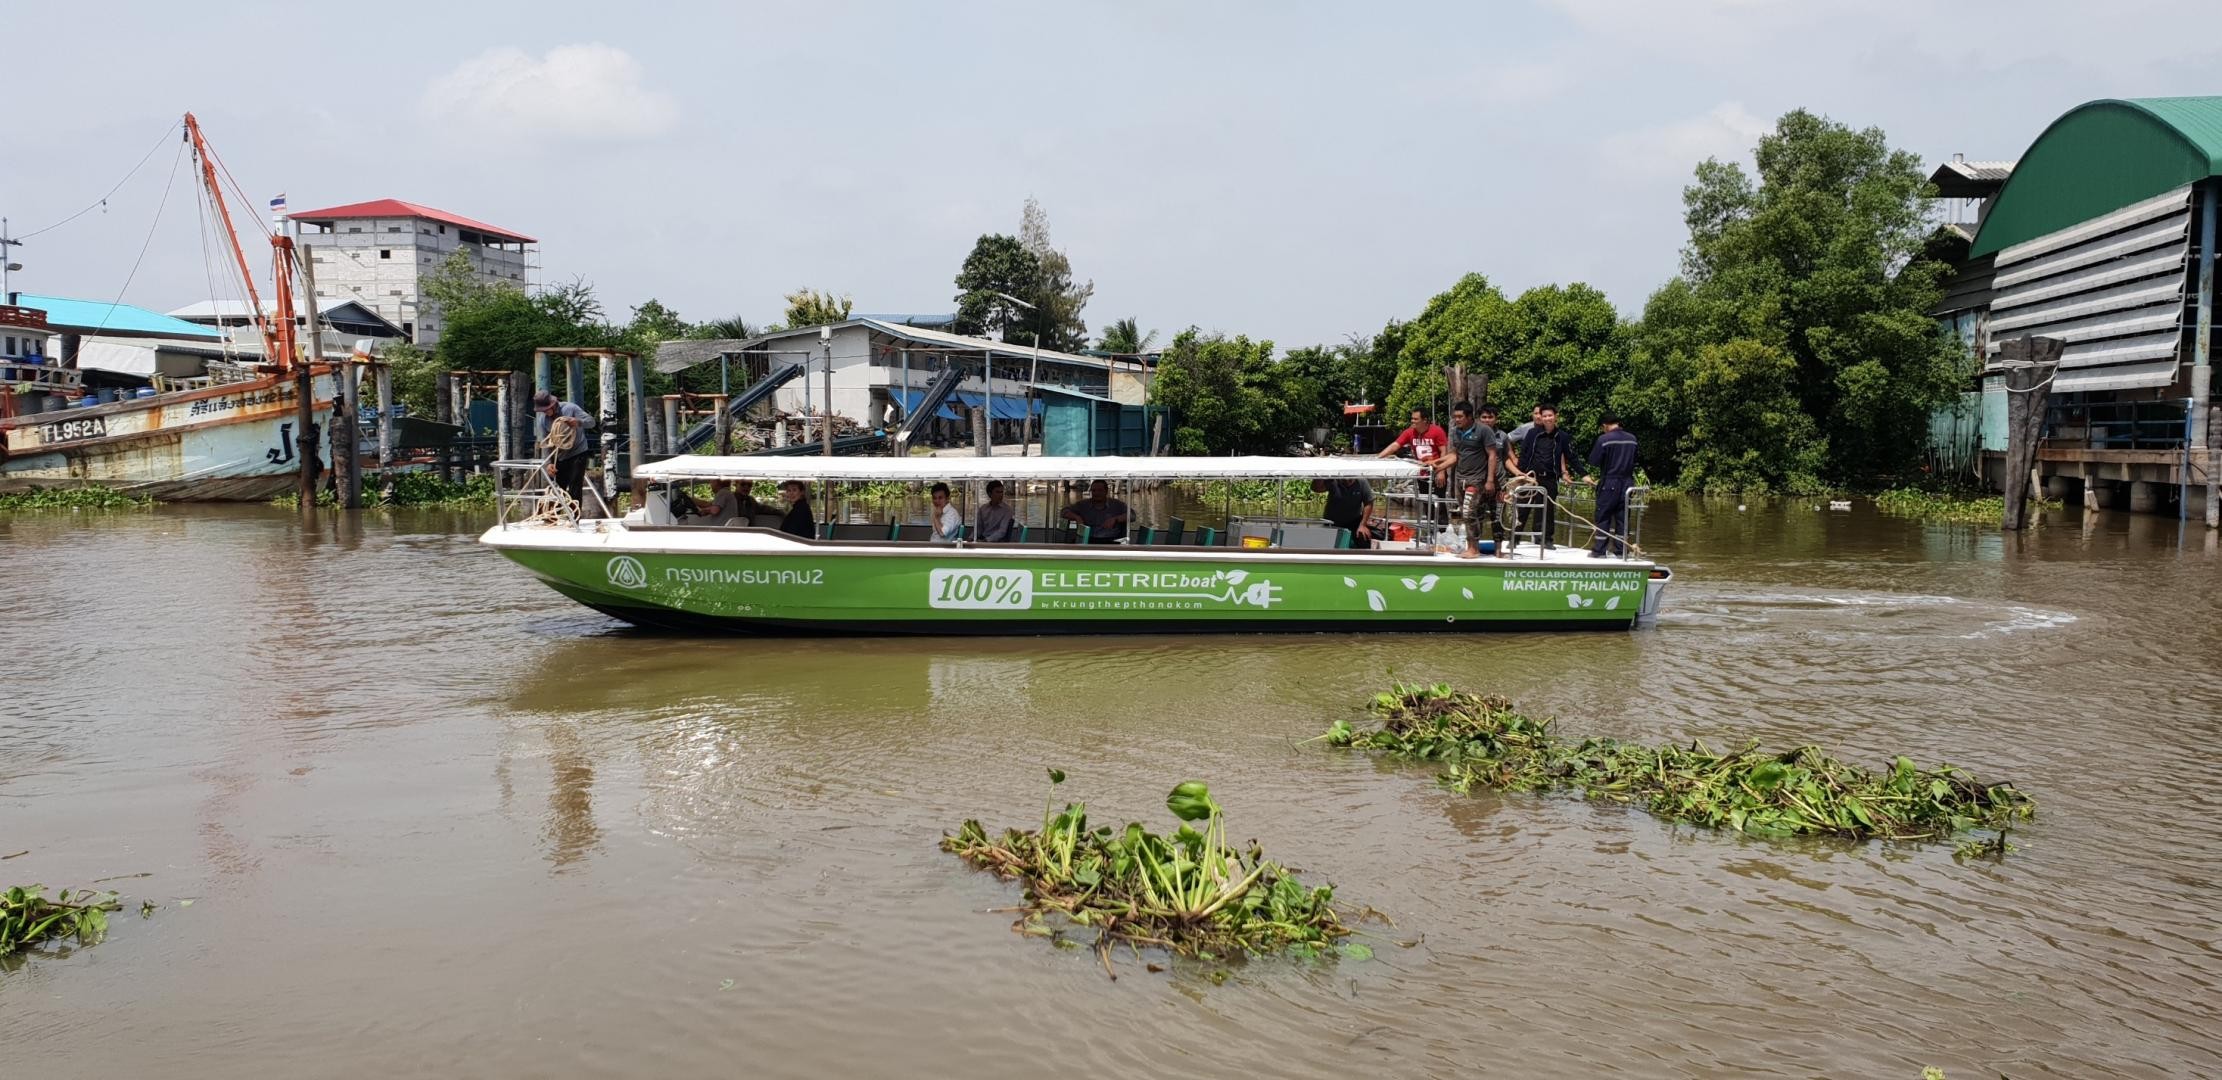 Thailand’s first all-electric passenger ferryis powered by Torqeedo